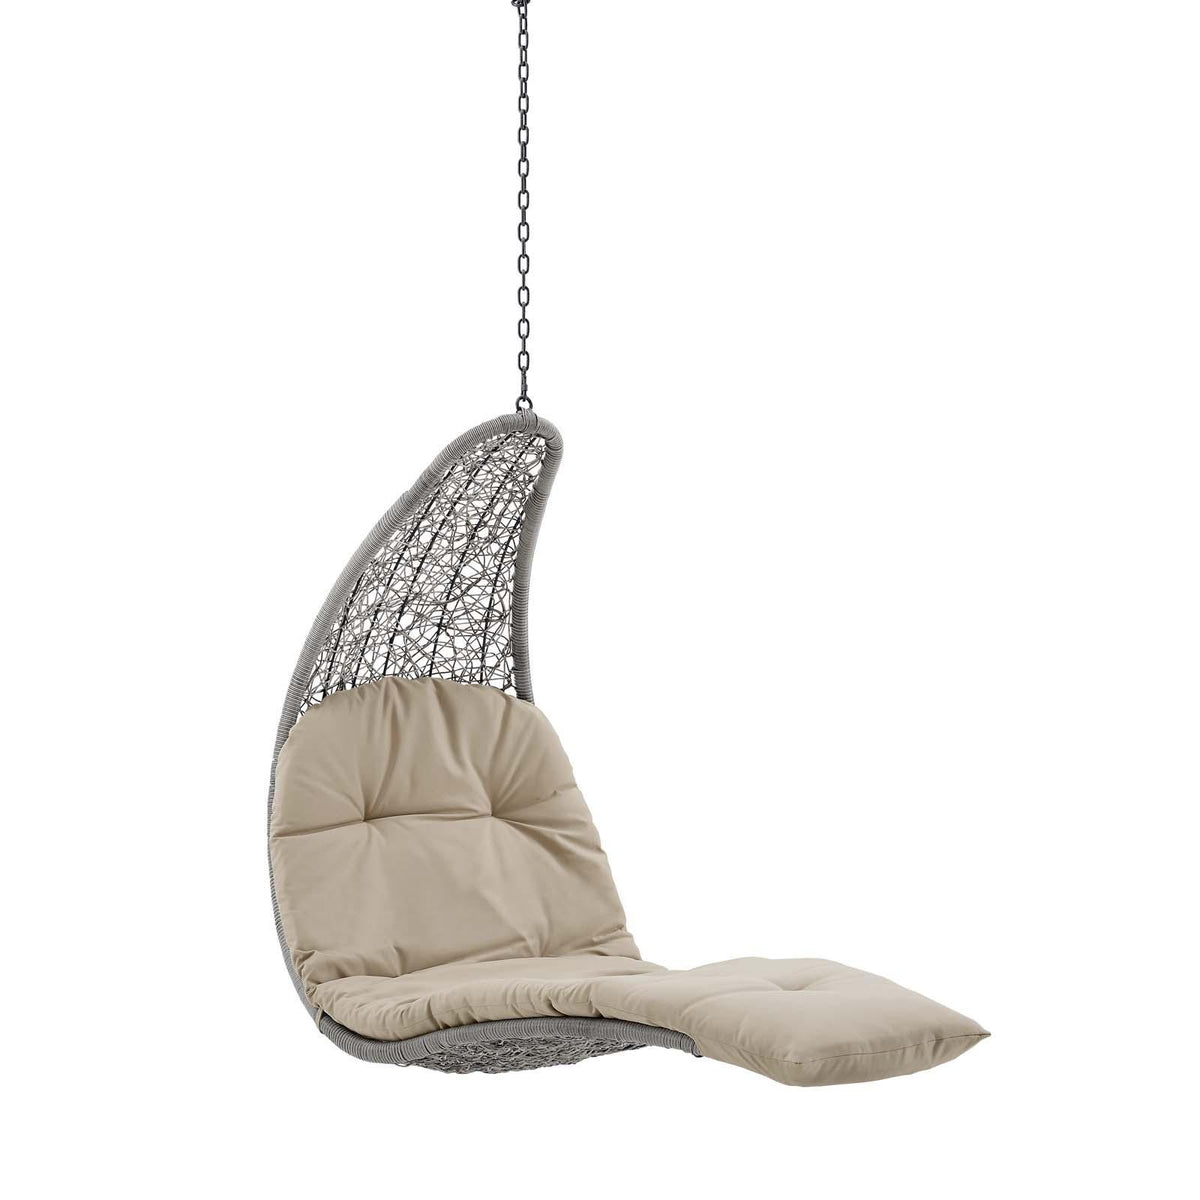 Modway Furniture Modern Landscape Hanging Chaise Lounge Outdoor Patio Swing Chair - EEI-4589